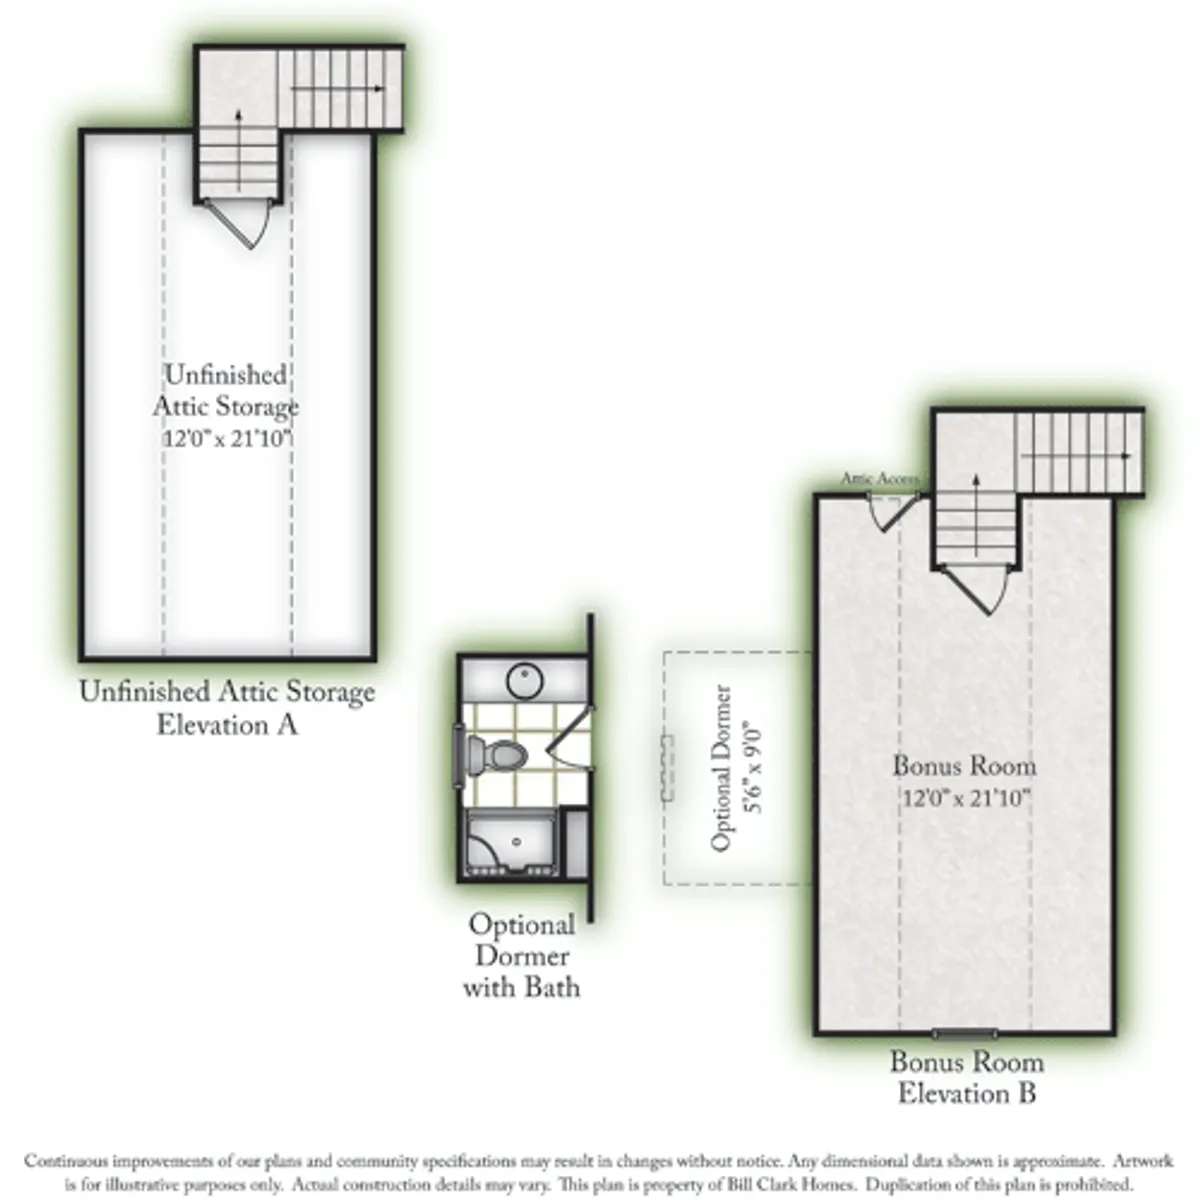 The Birkdale Unfinished Storage & Options